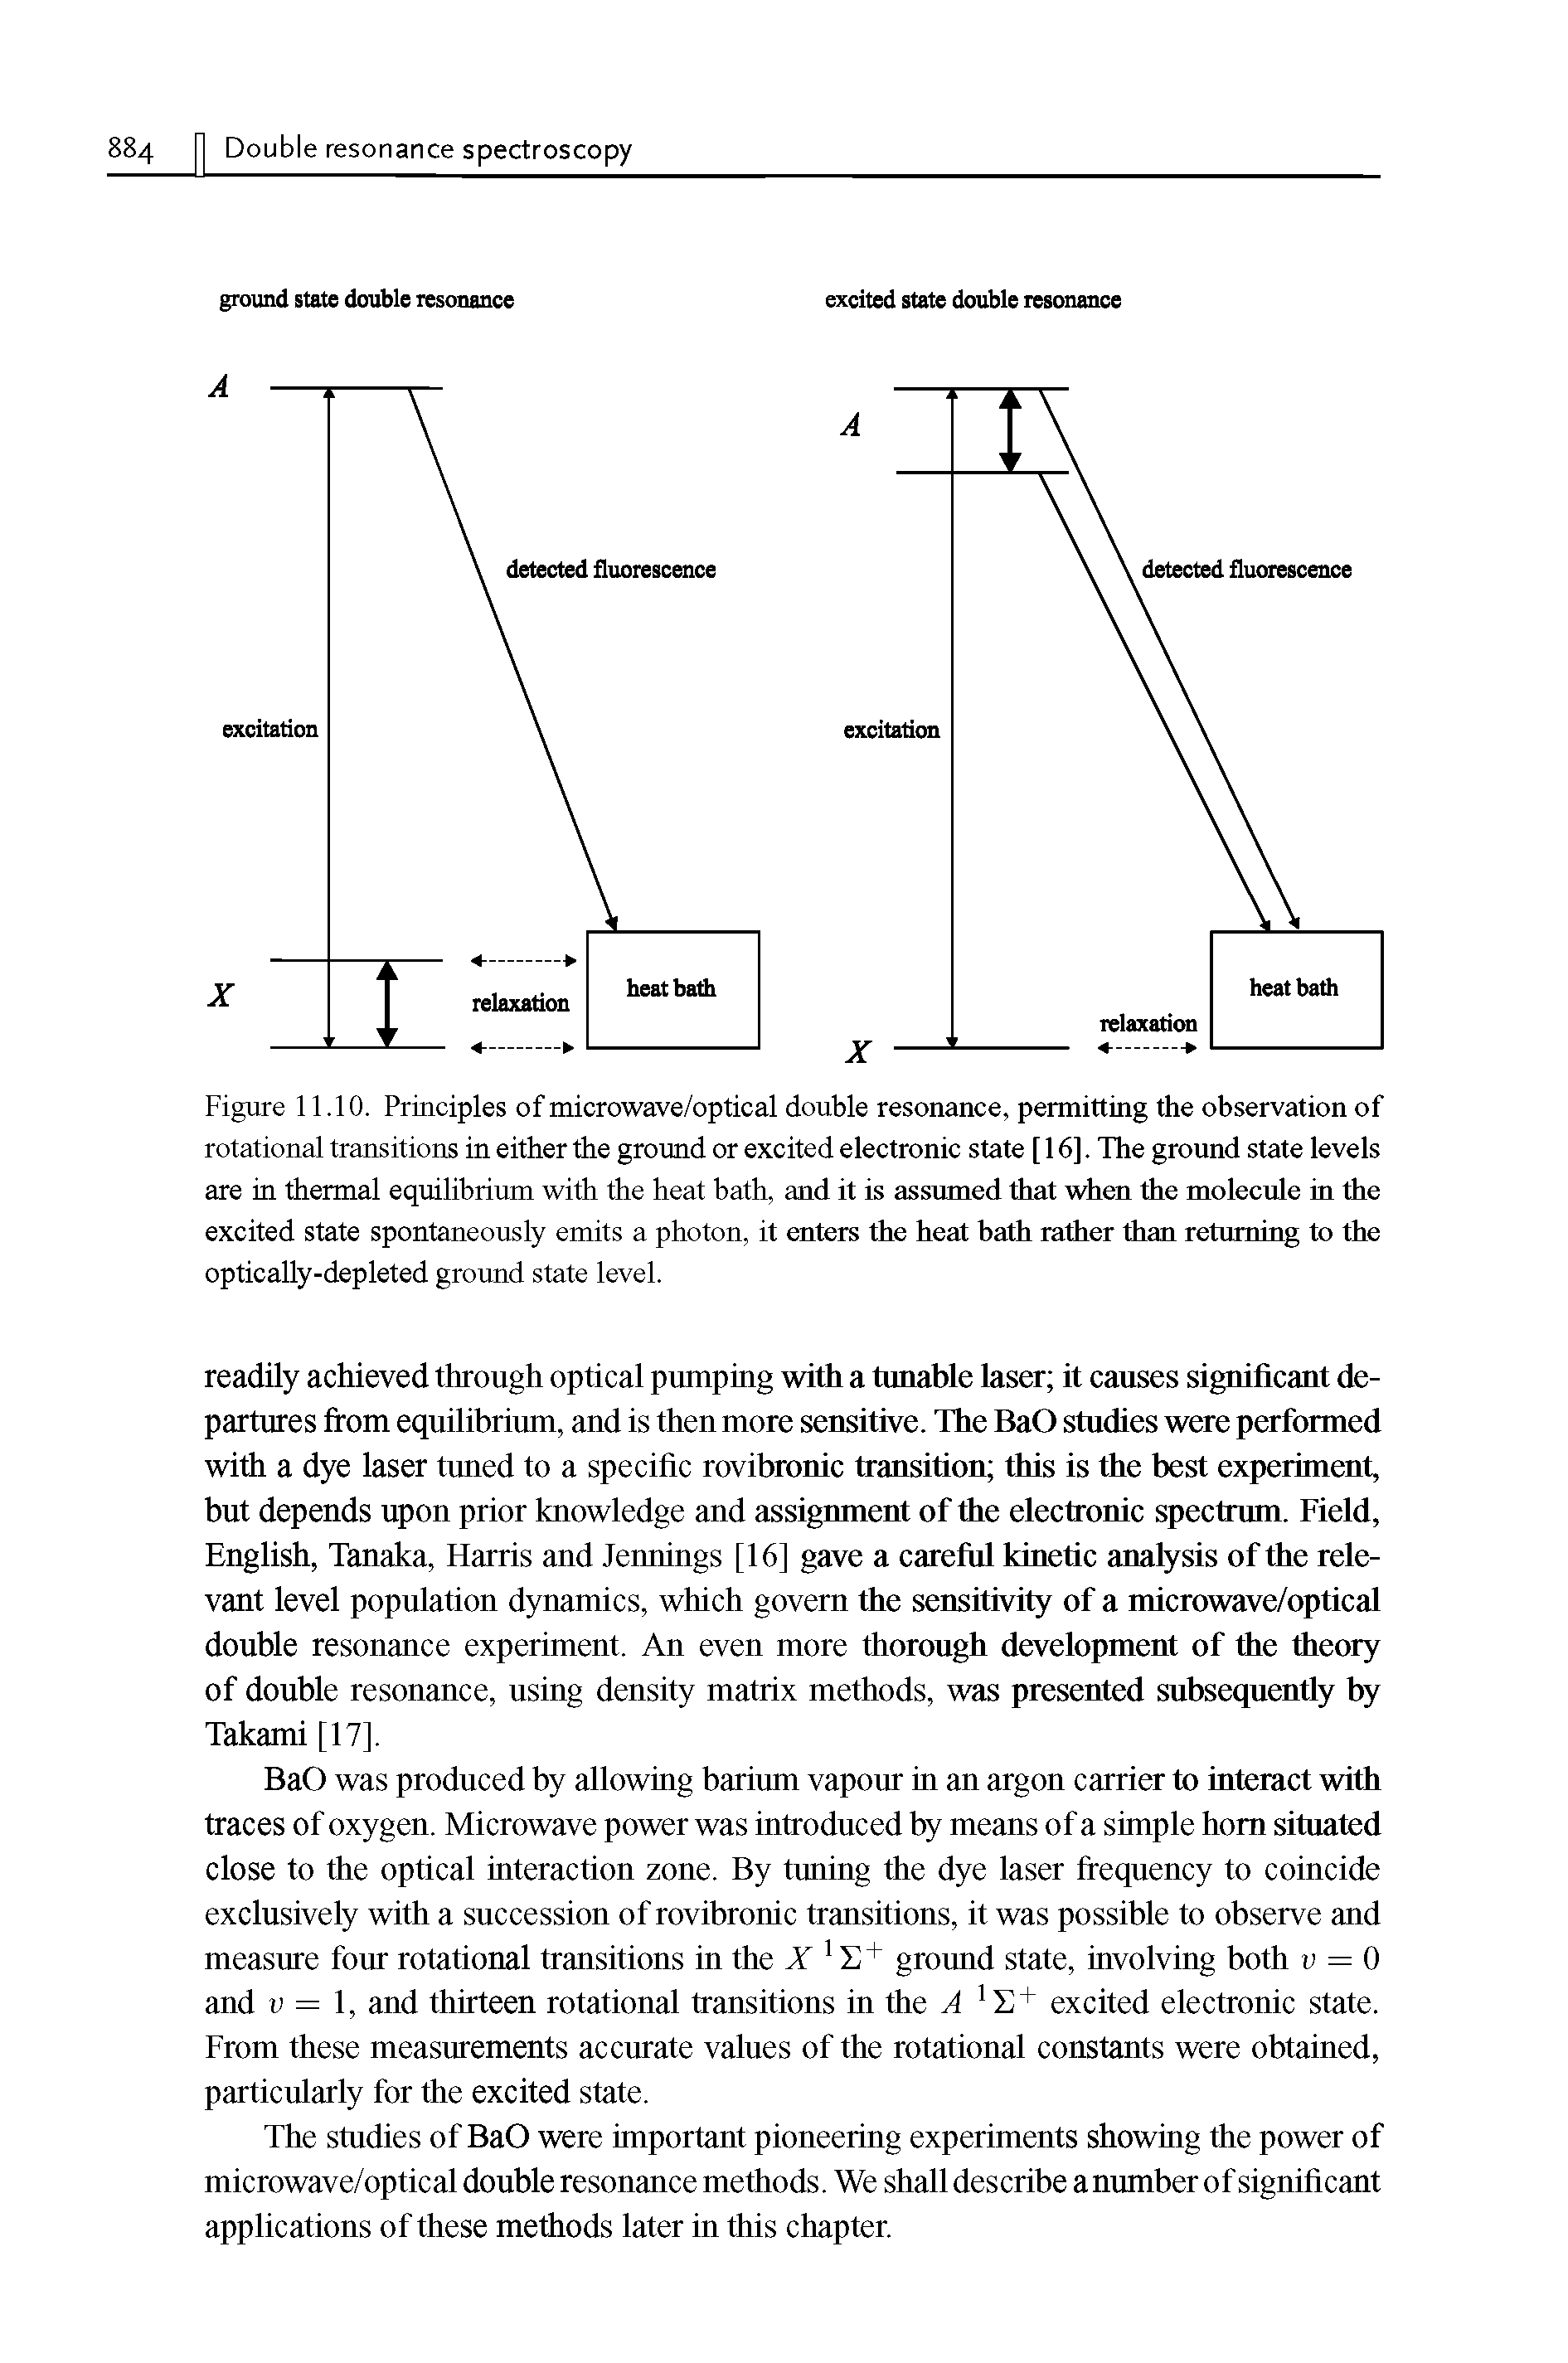 Figure 11.10. Principles of microwave/optical double resonance, permitting the observation of rotational transitions in either the ground or excited electronic state [16]. The ground state levels are in thermal equilibrium with the heat bath, and it is assumed that when the molecule in the excited state spontaneously emits a photon, it enters the heat bath rather than returning to the optically-depleted ground state level.